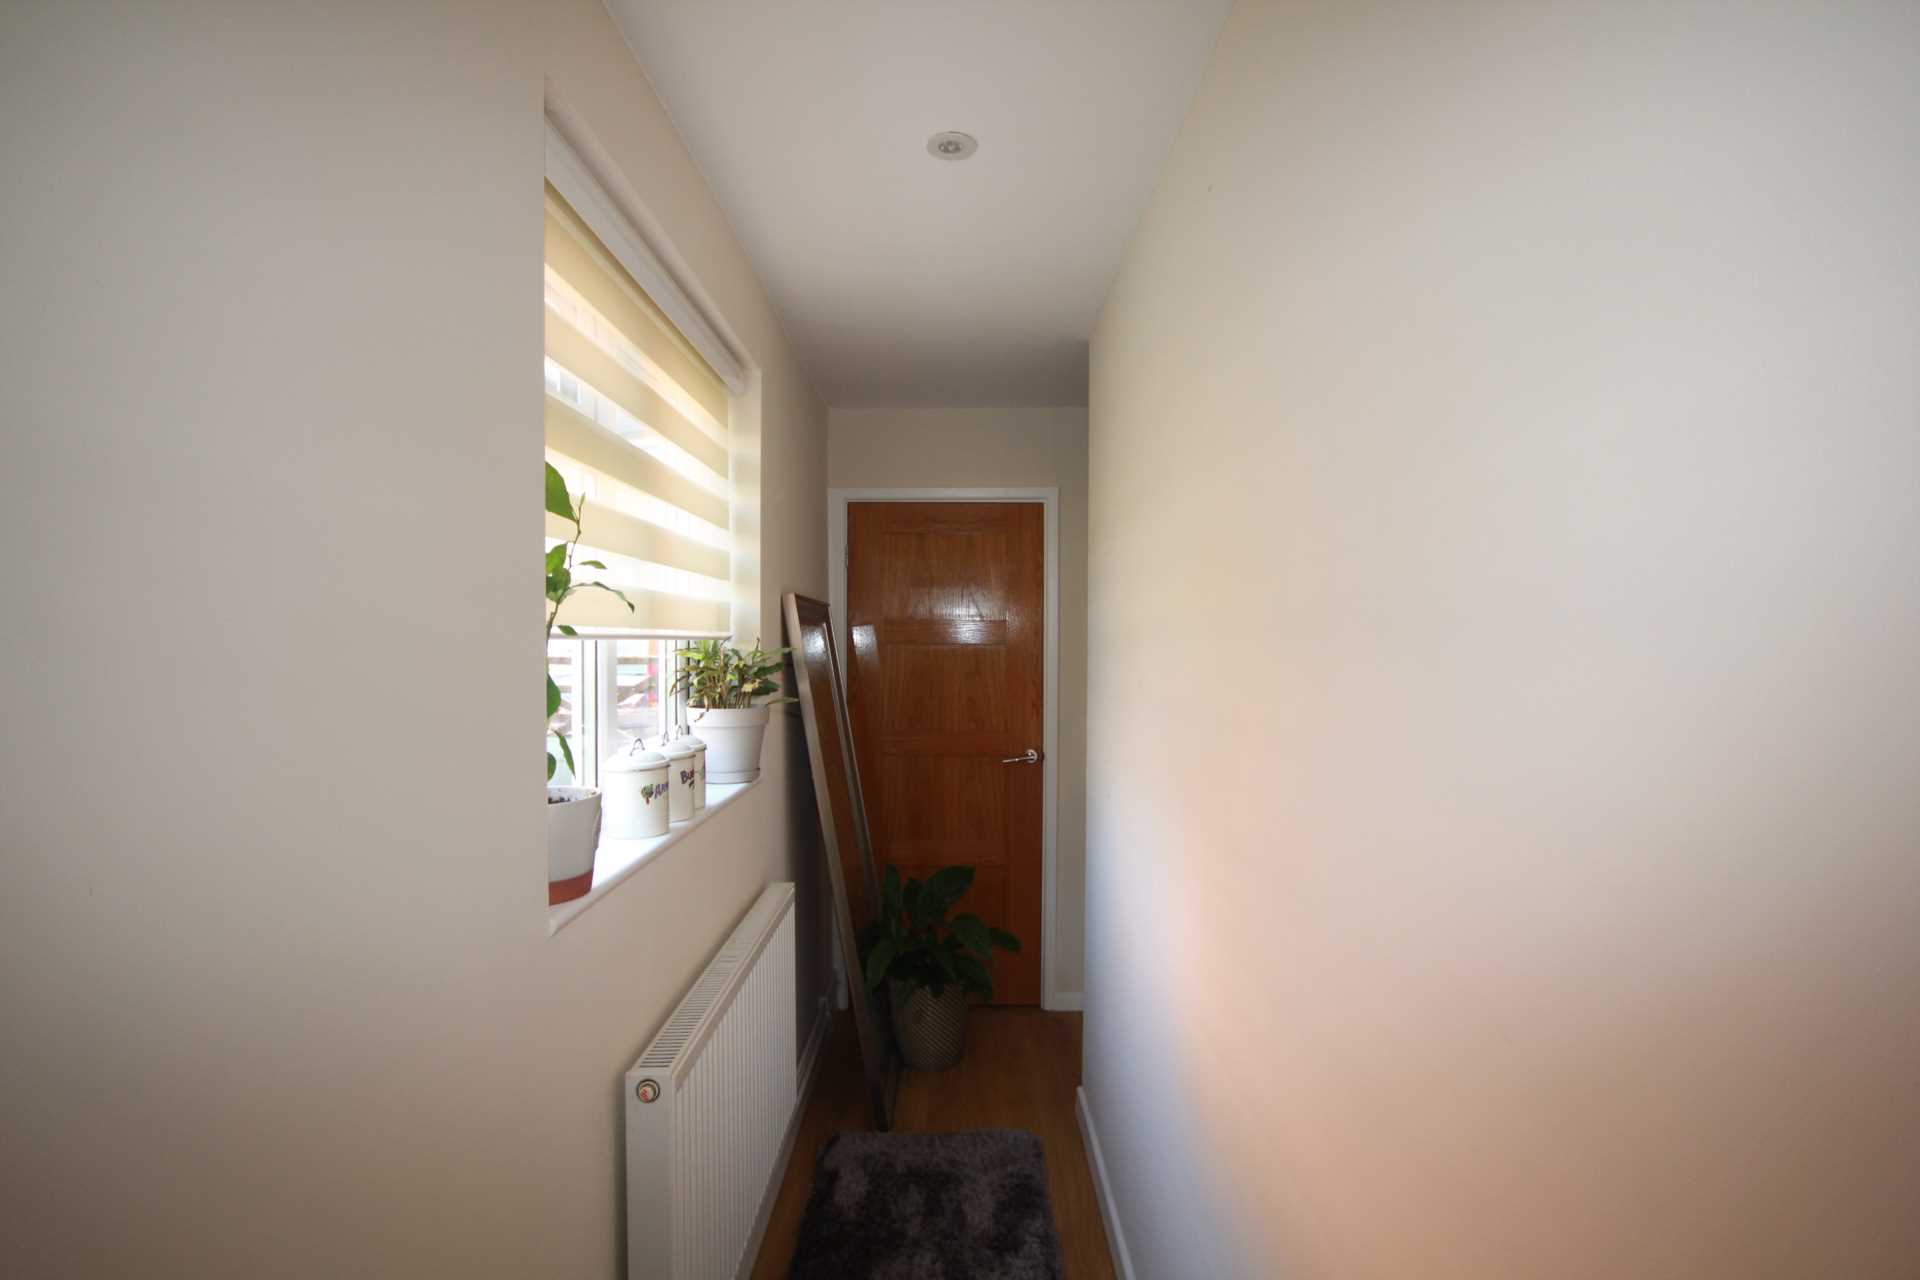 Refurbished Maisonette in Boxmoor, HP1, Unfurnished, Available from 07/05/22, Image 6